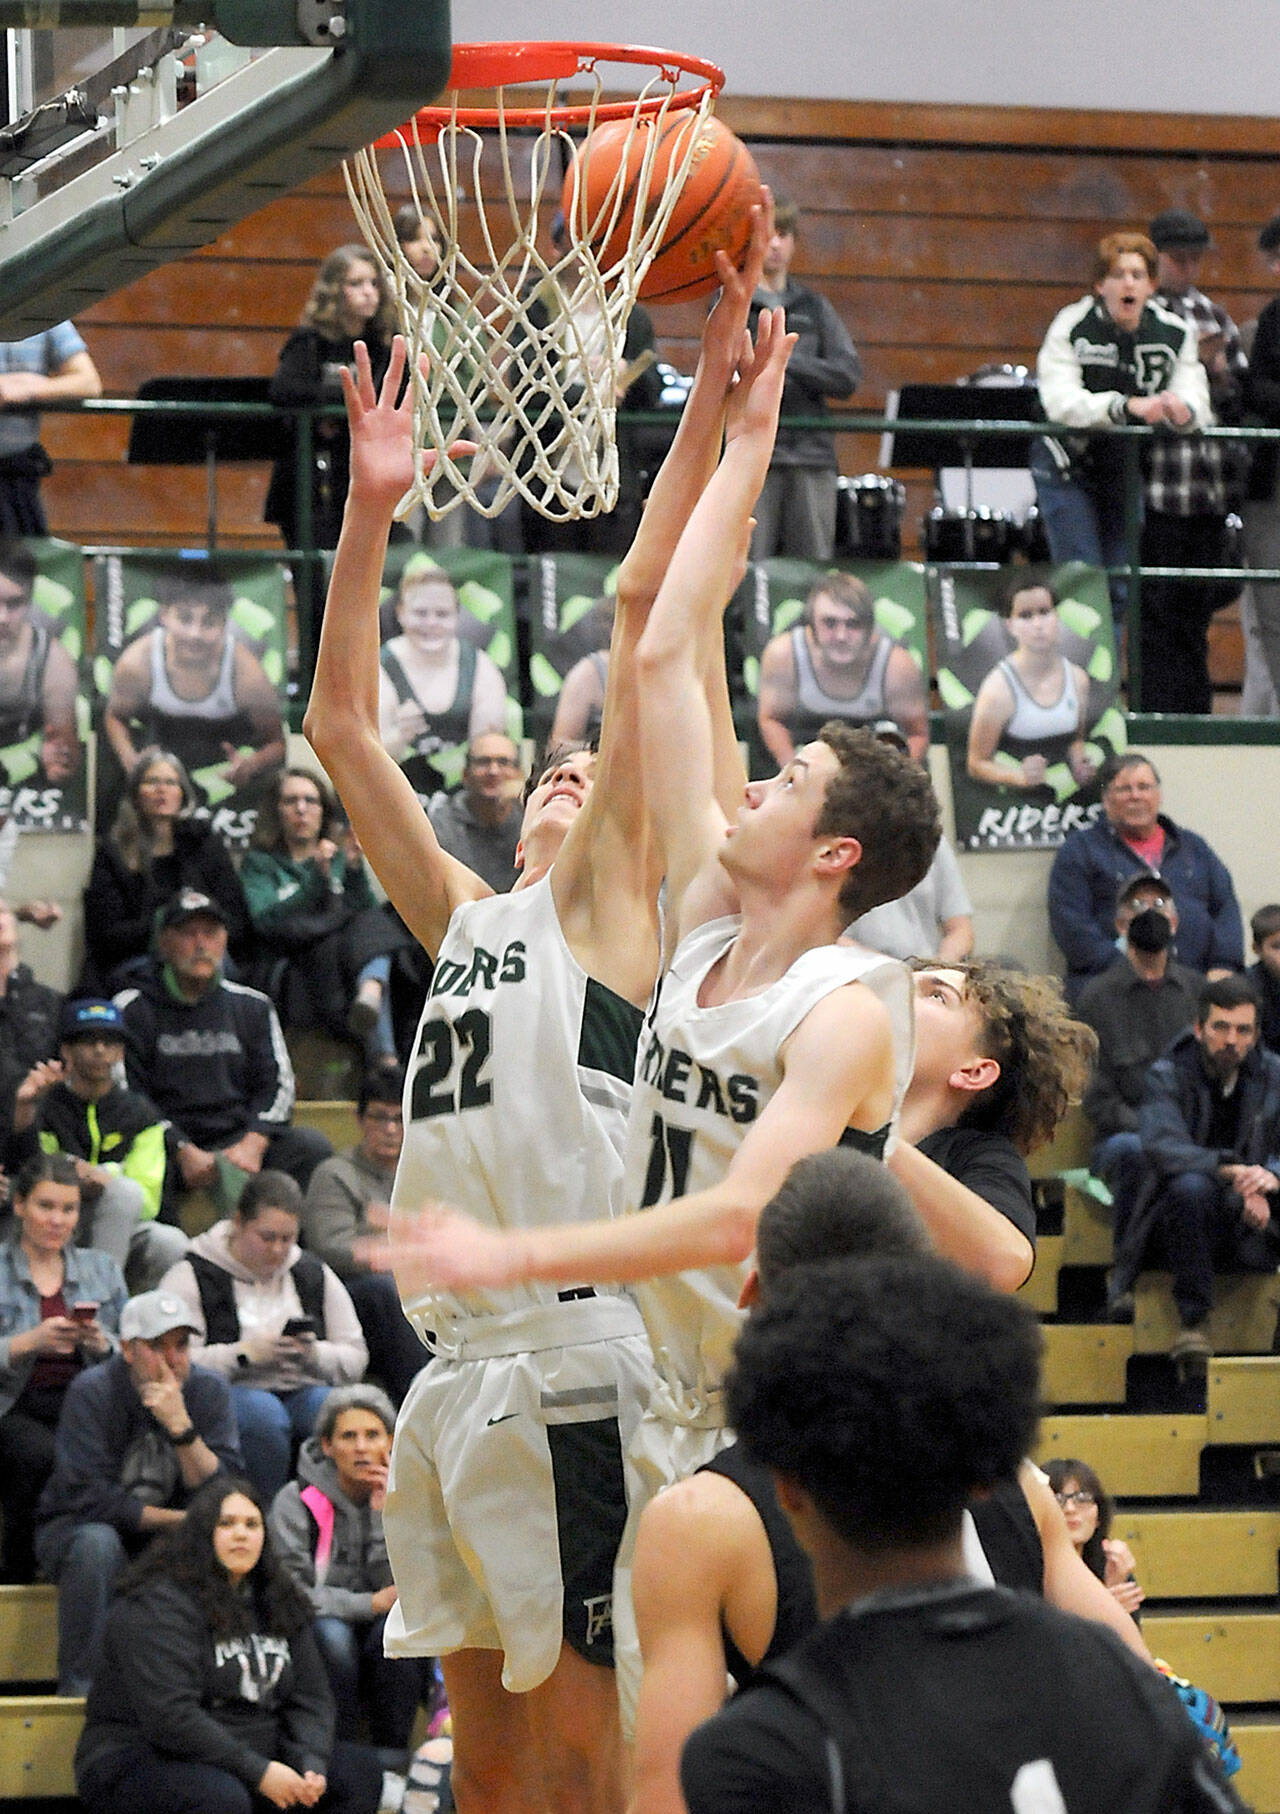 KEITH THORPE/PENINSULA DAILY NEWS Port Angeles’ Tyler Hunter, left, and teammate Dallas Dunning try to get the ball to the hoop as North Kitsap’s Jaxon Korsak, left, tries to break up the play on Thursday night at Port Angeles High School.